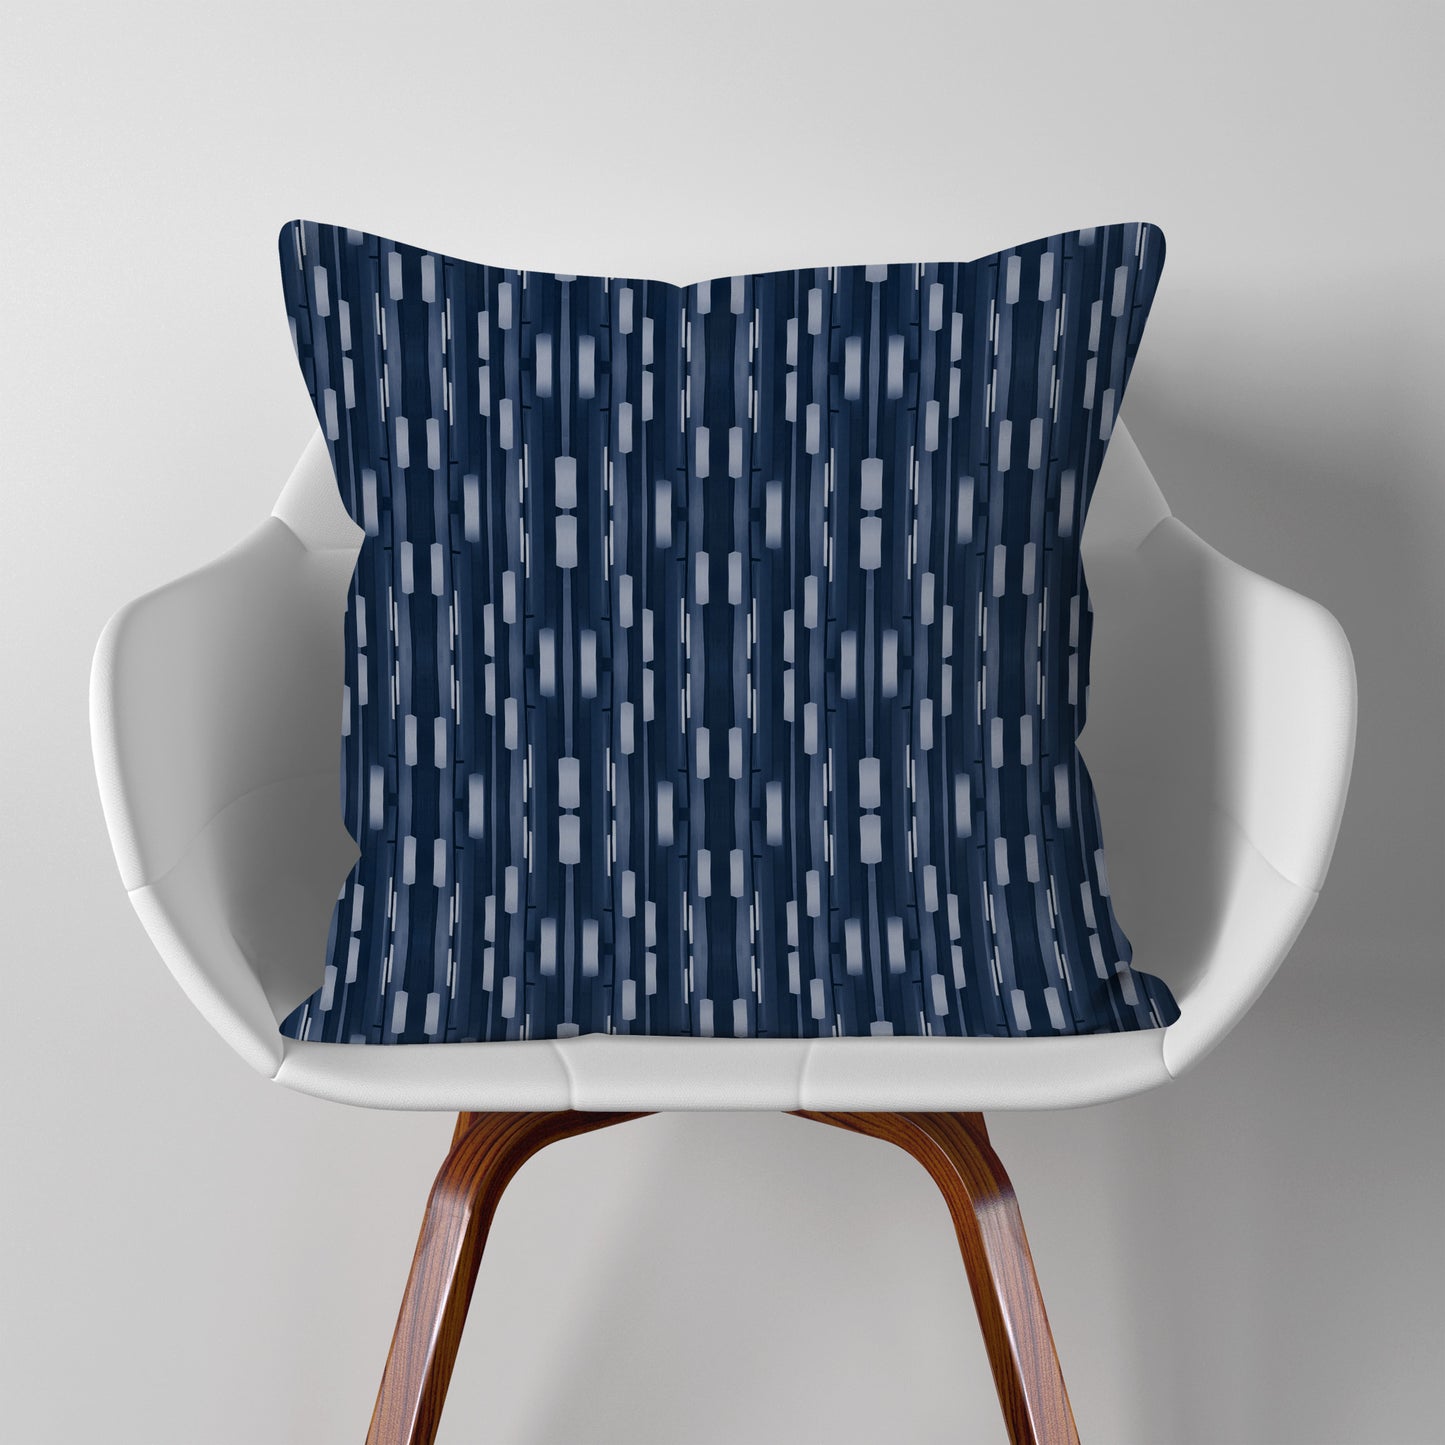 Pillow featuring collaged stripe pattern in blue and white, sitting on a modern white chair